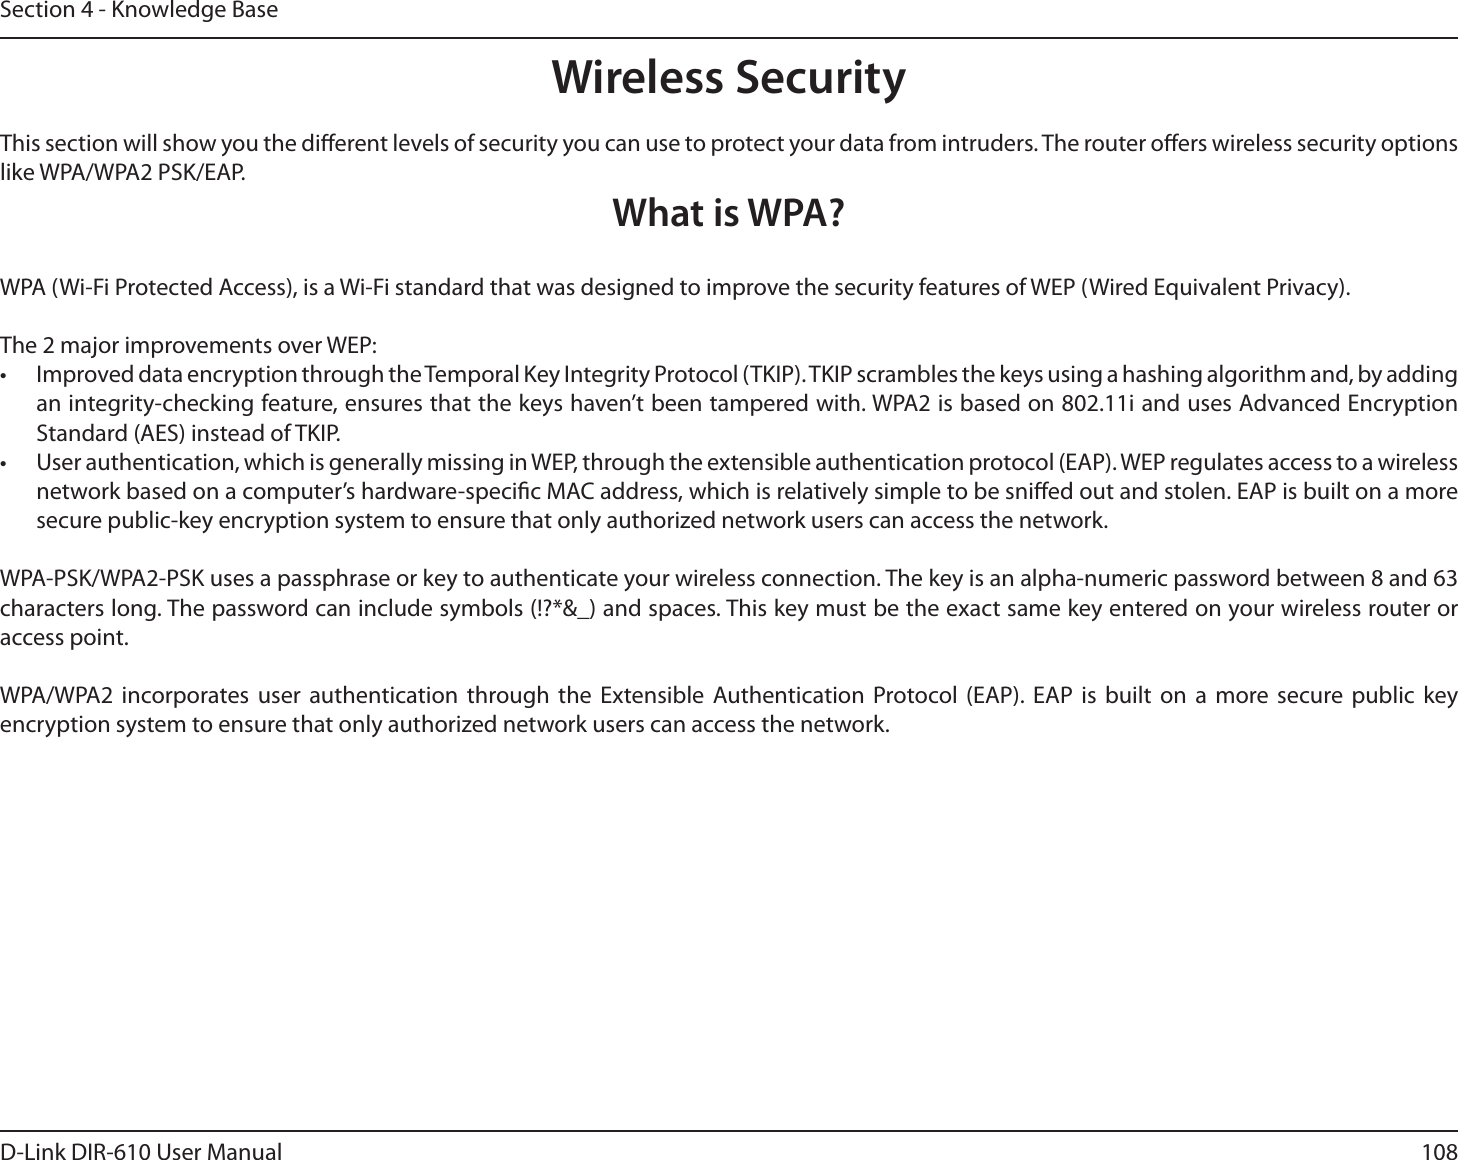 108D-Link DIR-610 User ManualSection 4 - Knowledge BaseWireless SecurityThis section will show you the dierent levels of security you can use to protect your data from intruders. The router oers wireless security options like WPA/WPA2 PSK/EAP.What is WPA?WPA (Wi-Fi Protected Access), is a Wi-Fi standard that was designed to improve the security features of WEP (Wired Equivalent Privacy).The 2 major improvements over WEP:•  Improved data encryption through the Temporal Key Integrity Protocol (TKIP). TKIP scrambles the keys using a hashing algorithm and, by adding an integrity-checking feature, ensures that the keys haven’t been tampered with. WPA2 is based on 802.11i and uses Advanced Encryption Standard (AES) instead of TKIP.•  User authentication, which is generally missing in WEP, through the extensible authentication protocol (EAP). WEP regulates access to a wireless network based on a computer’s hardware-specic MAC address, which is relatively simple to be snied out and stolen. EAP is built on a more secure public-key encryption system to ensure that only authorized network users can access the network.WPA-PSK/WPA2-PSK uses a passphrase or key to authenticate your wireless connection. The key is an alpha-numeric password between 8 and 63 characters long. The password can include symbols (!?*&amp;_) and spaces. This key must be the exact same key entered on your wireless router or access point.WPA/WPA2 incorporates user authentication through the Extensible Authentication Protocol (EAP). EAP is built on a more secure public key encryption system to ensure that only authorized network users can access the network.